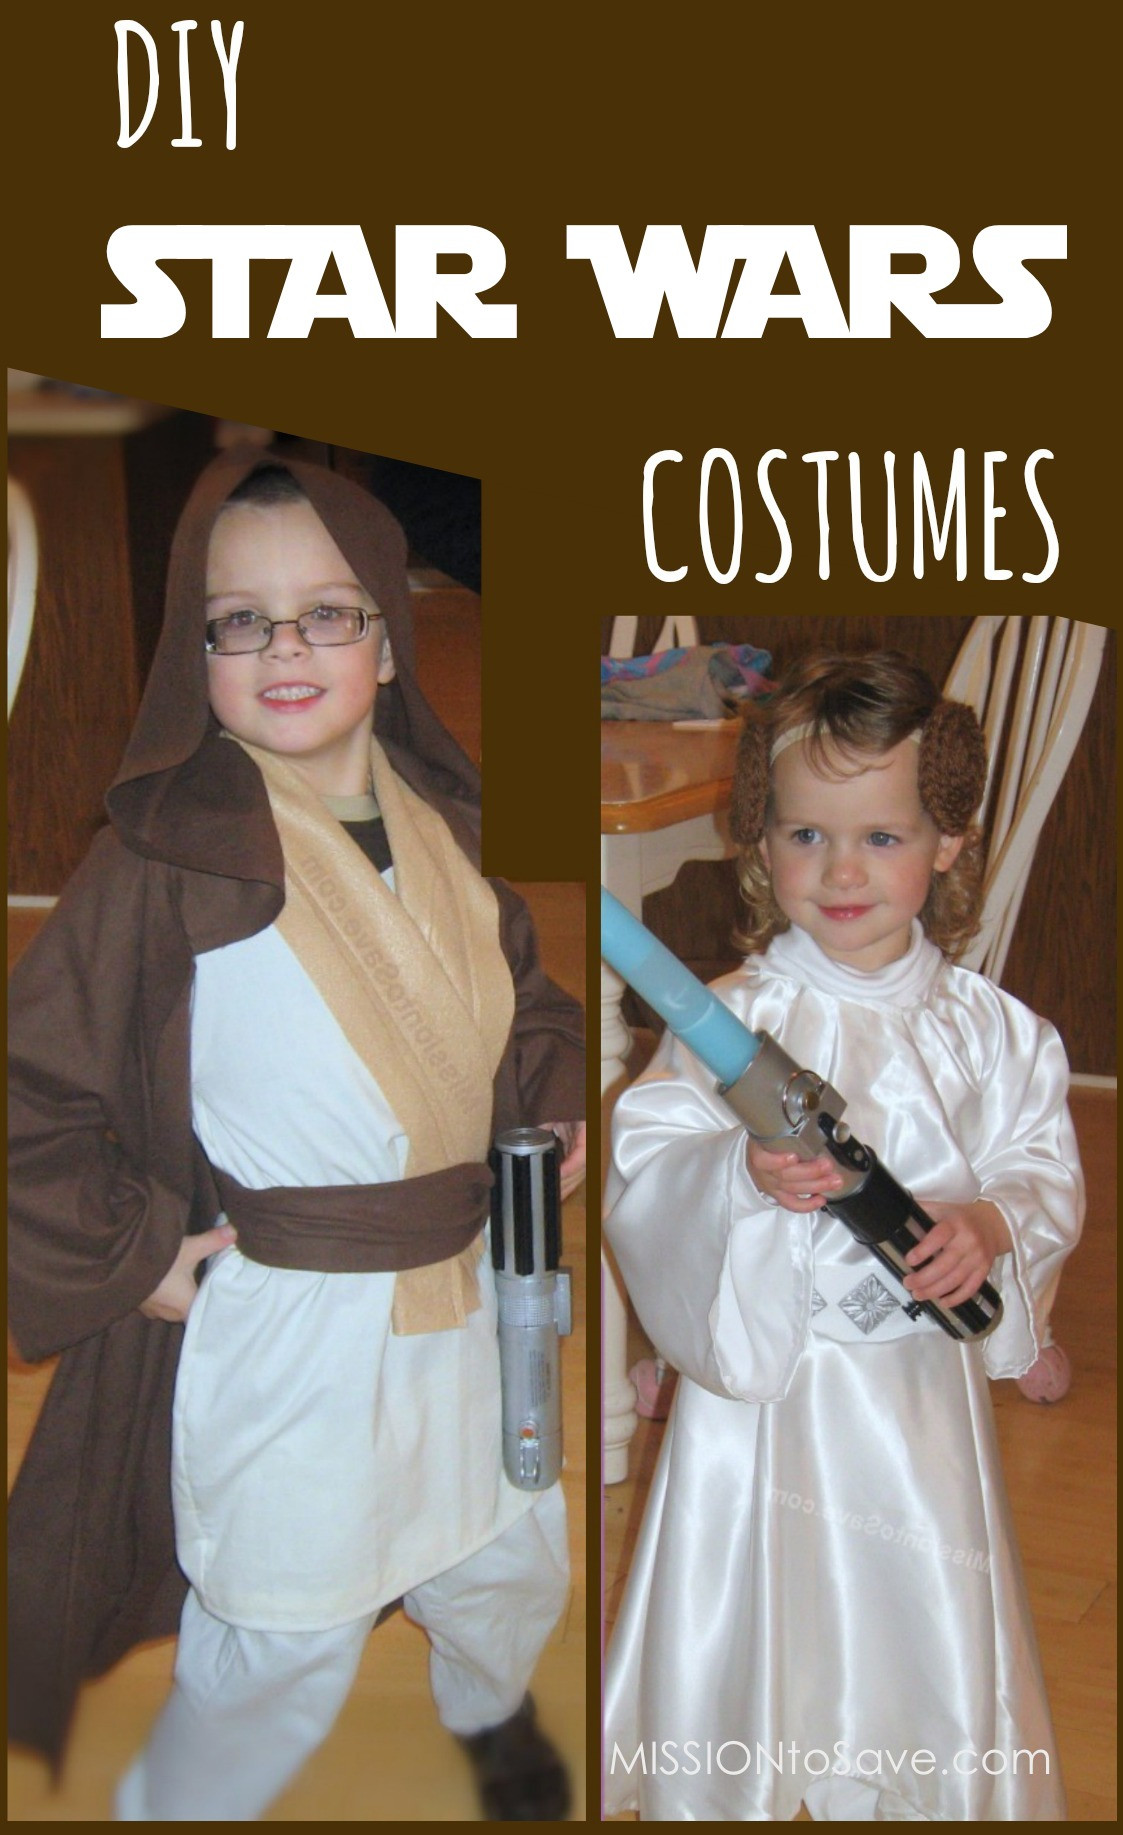 DIY Star Wars Costumes For Kids
 DIY Star Wars Costumes Jedi and Princess Leia Mission